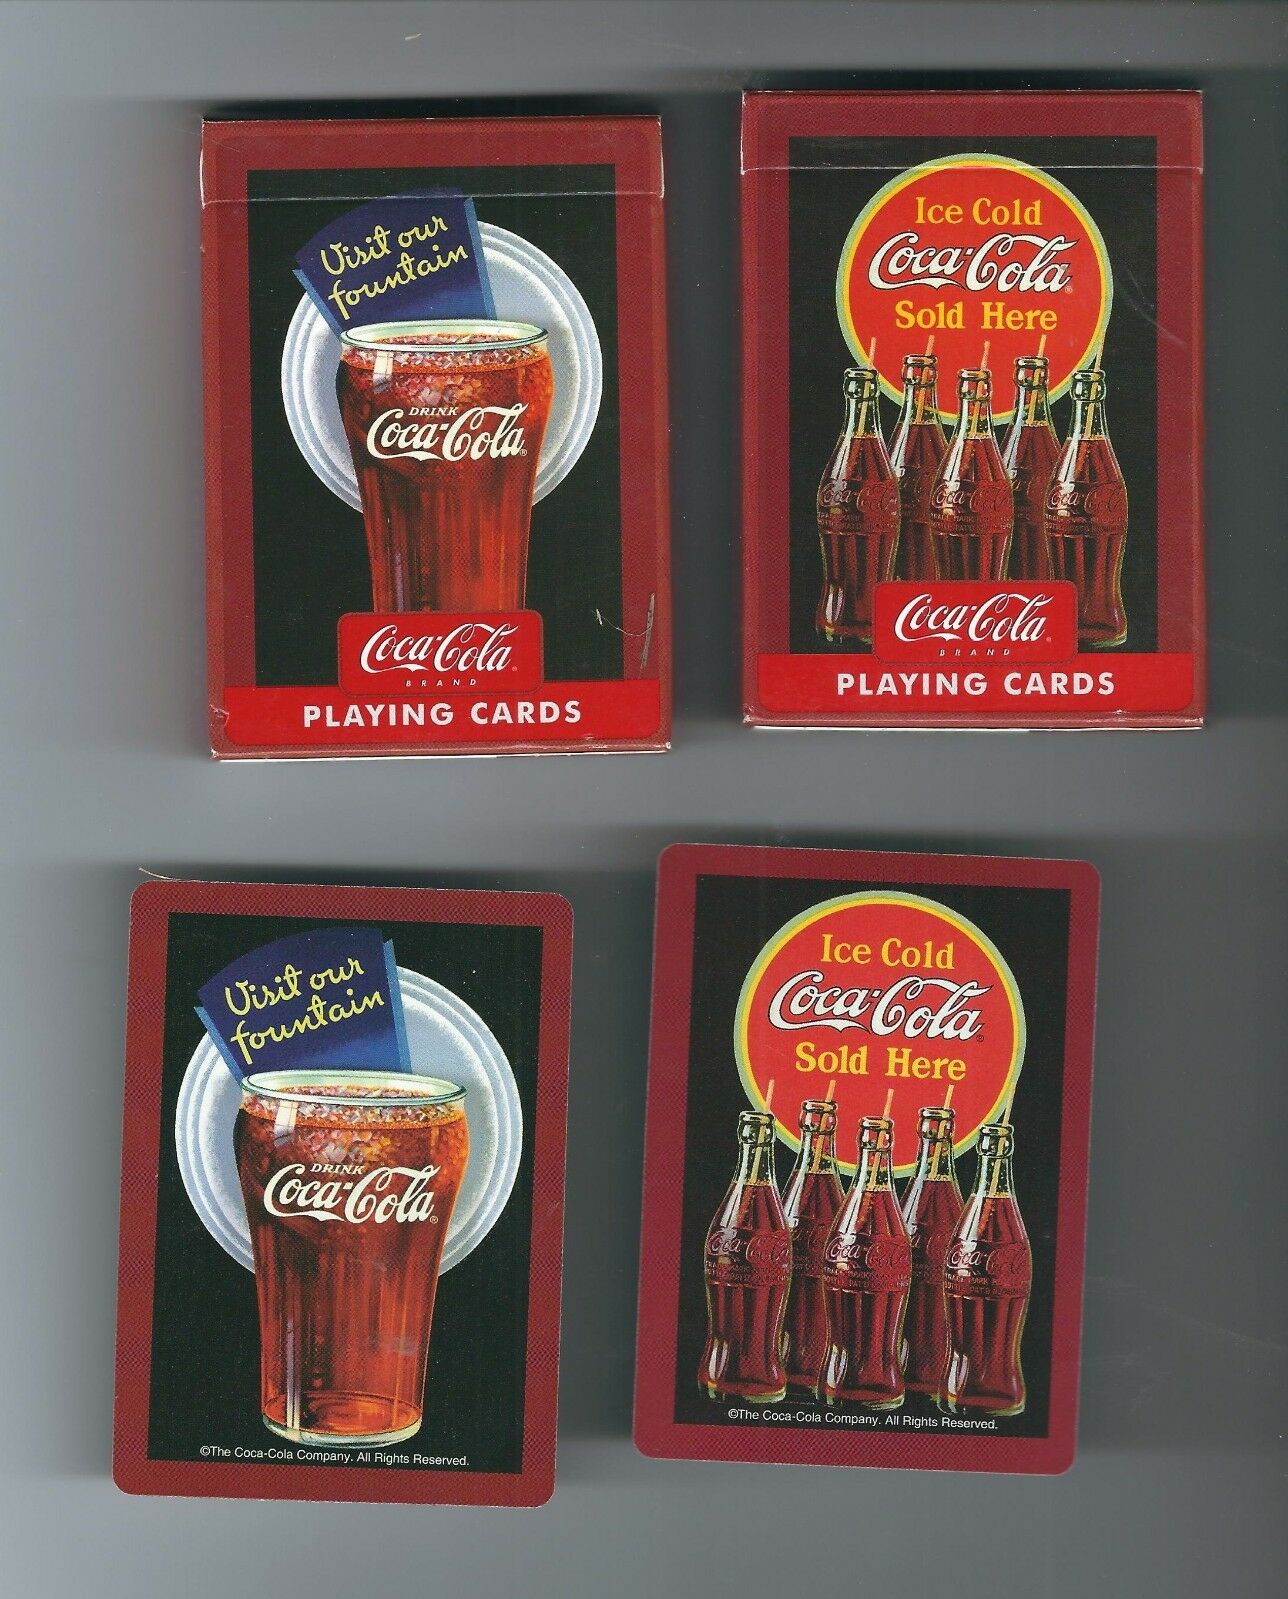 2 Coca-cola Bottle Playing Card Poker Decks On Black Background Brown Borders